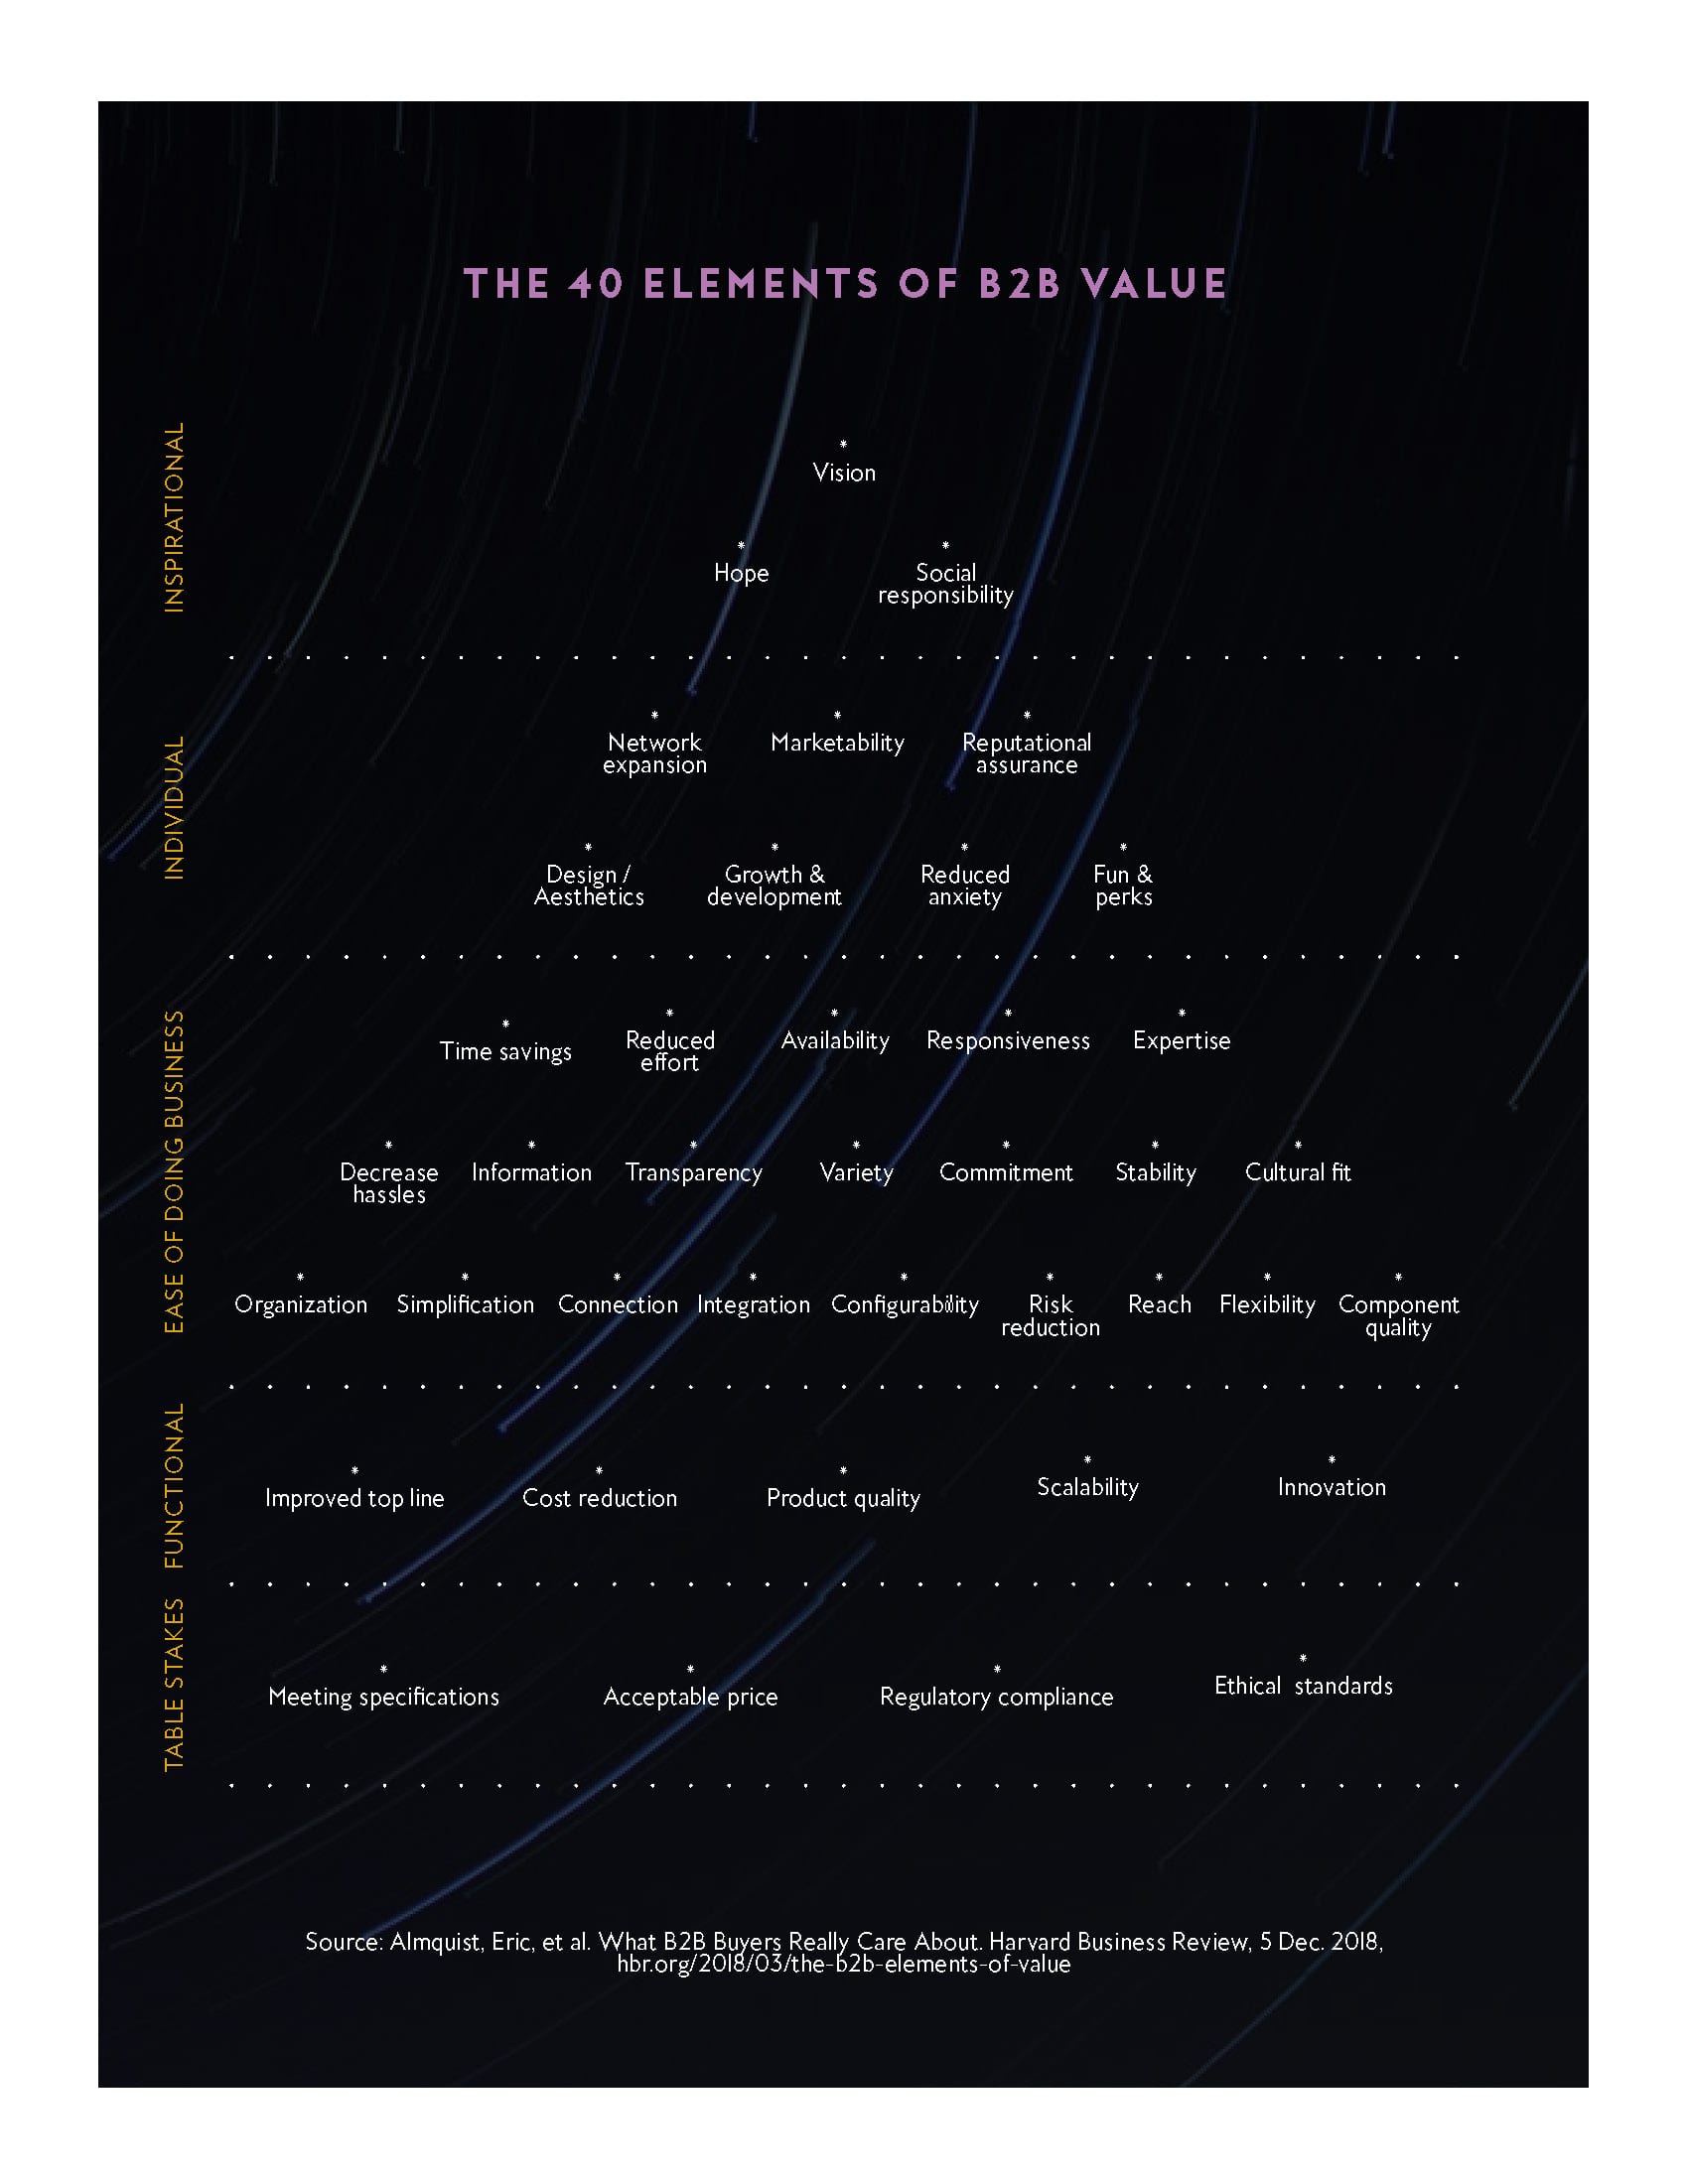 The 40 Elements of B2B Value